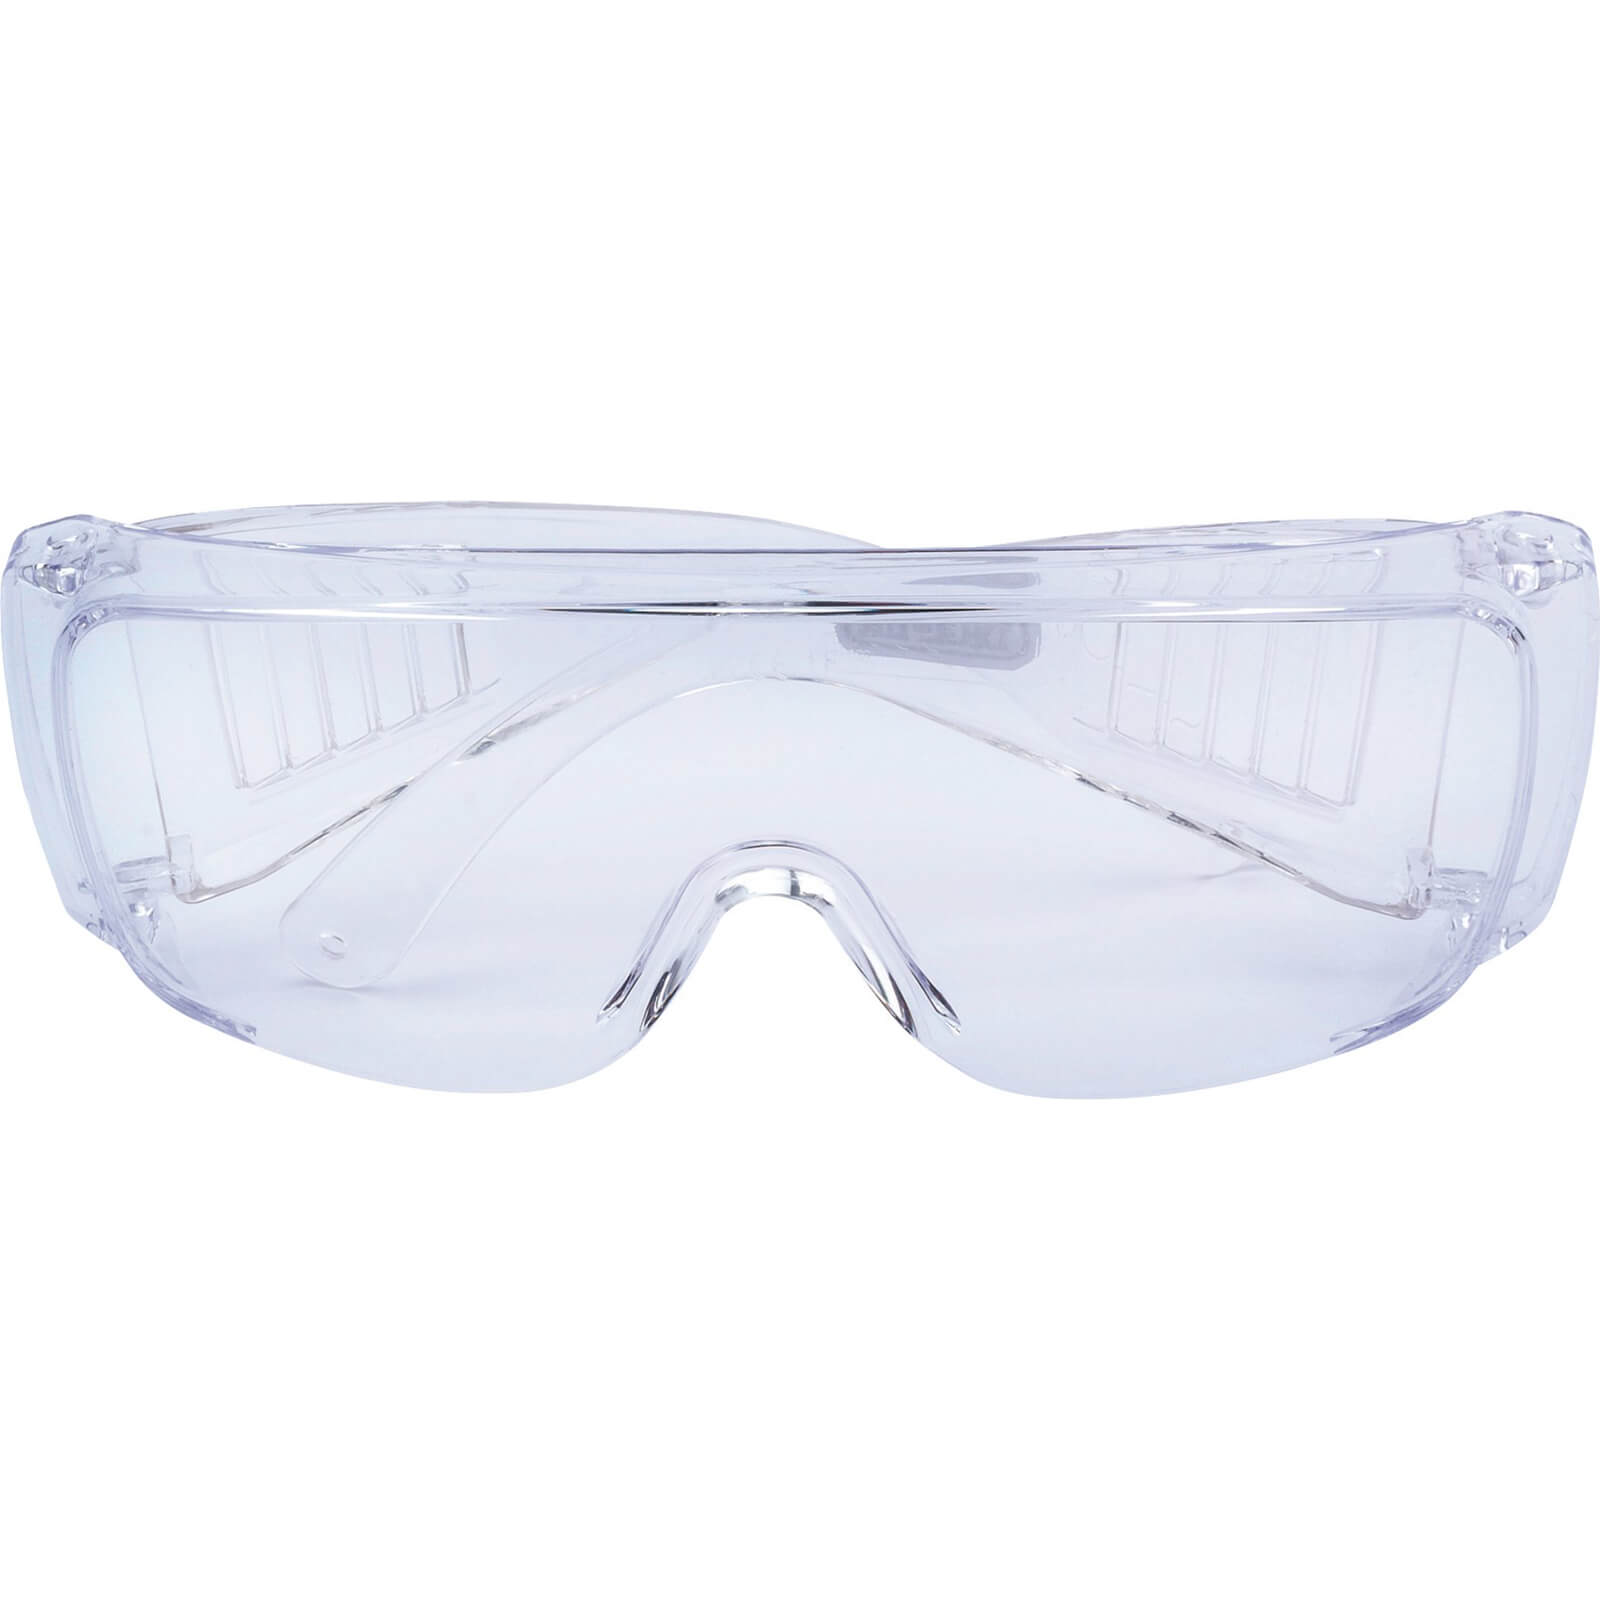 Image of Draper Polycarbonate Safety Glasses